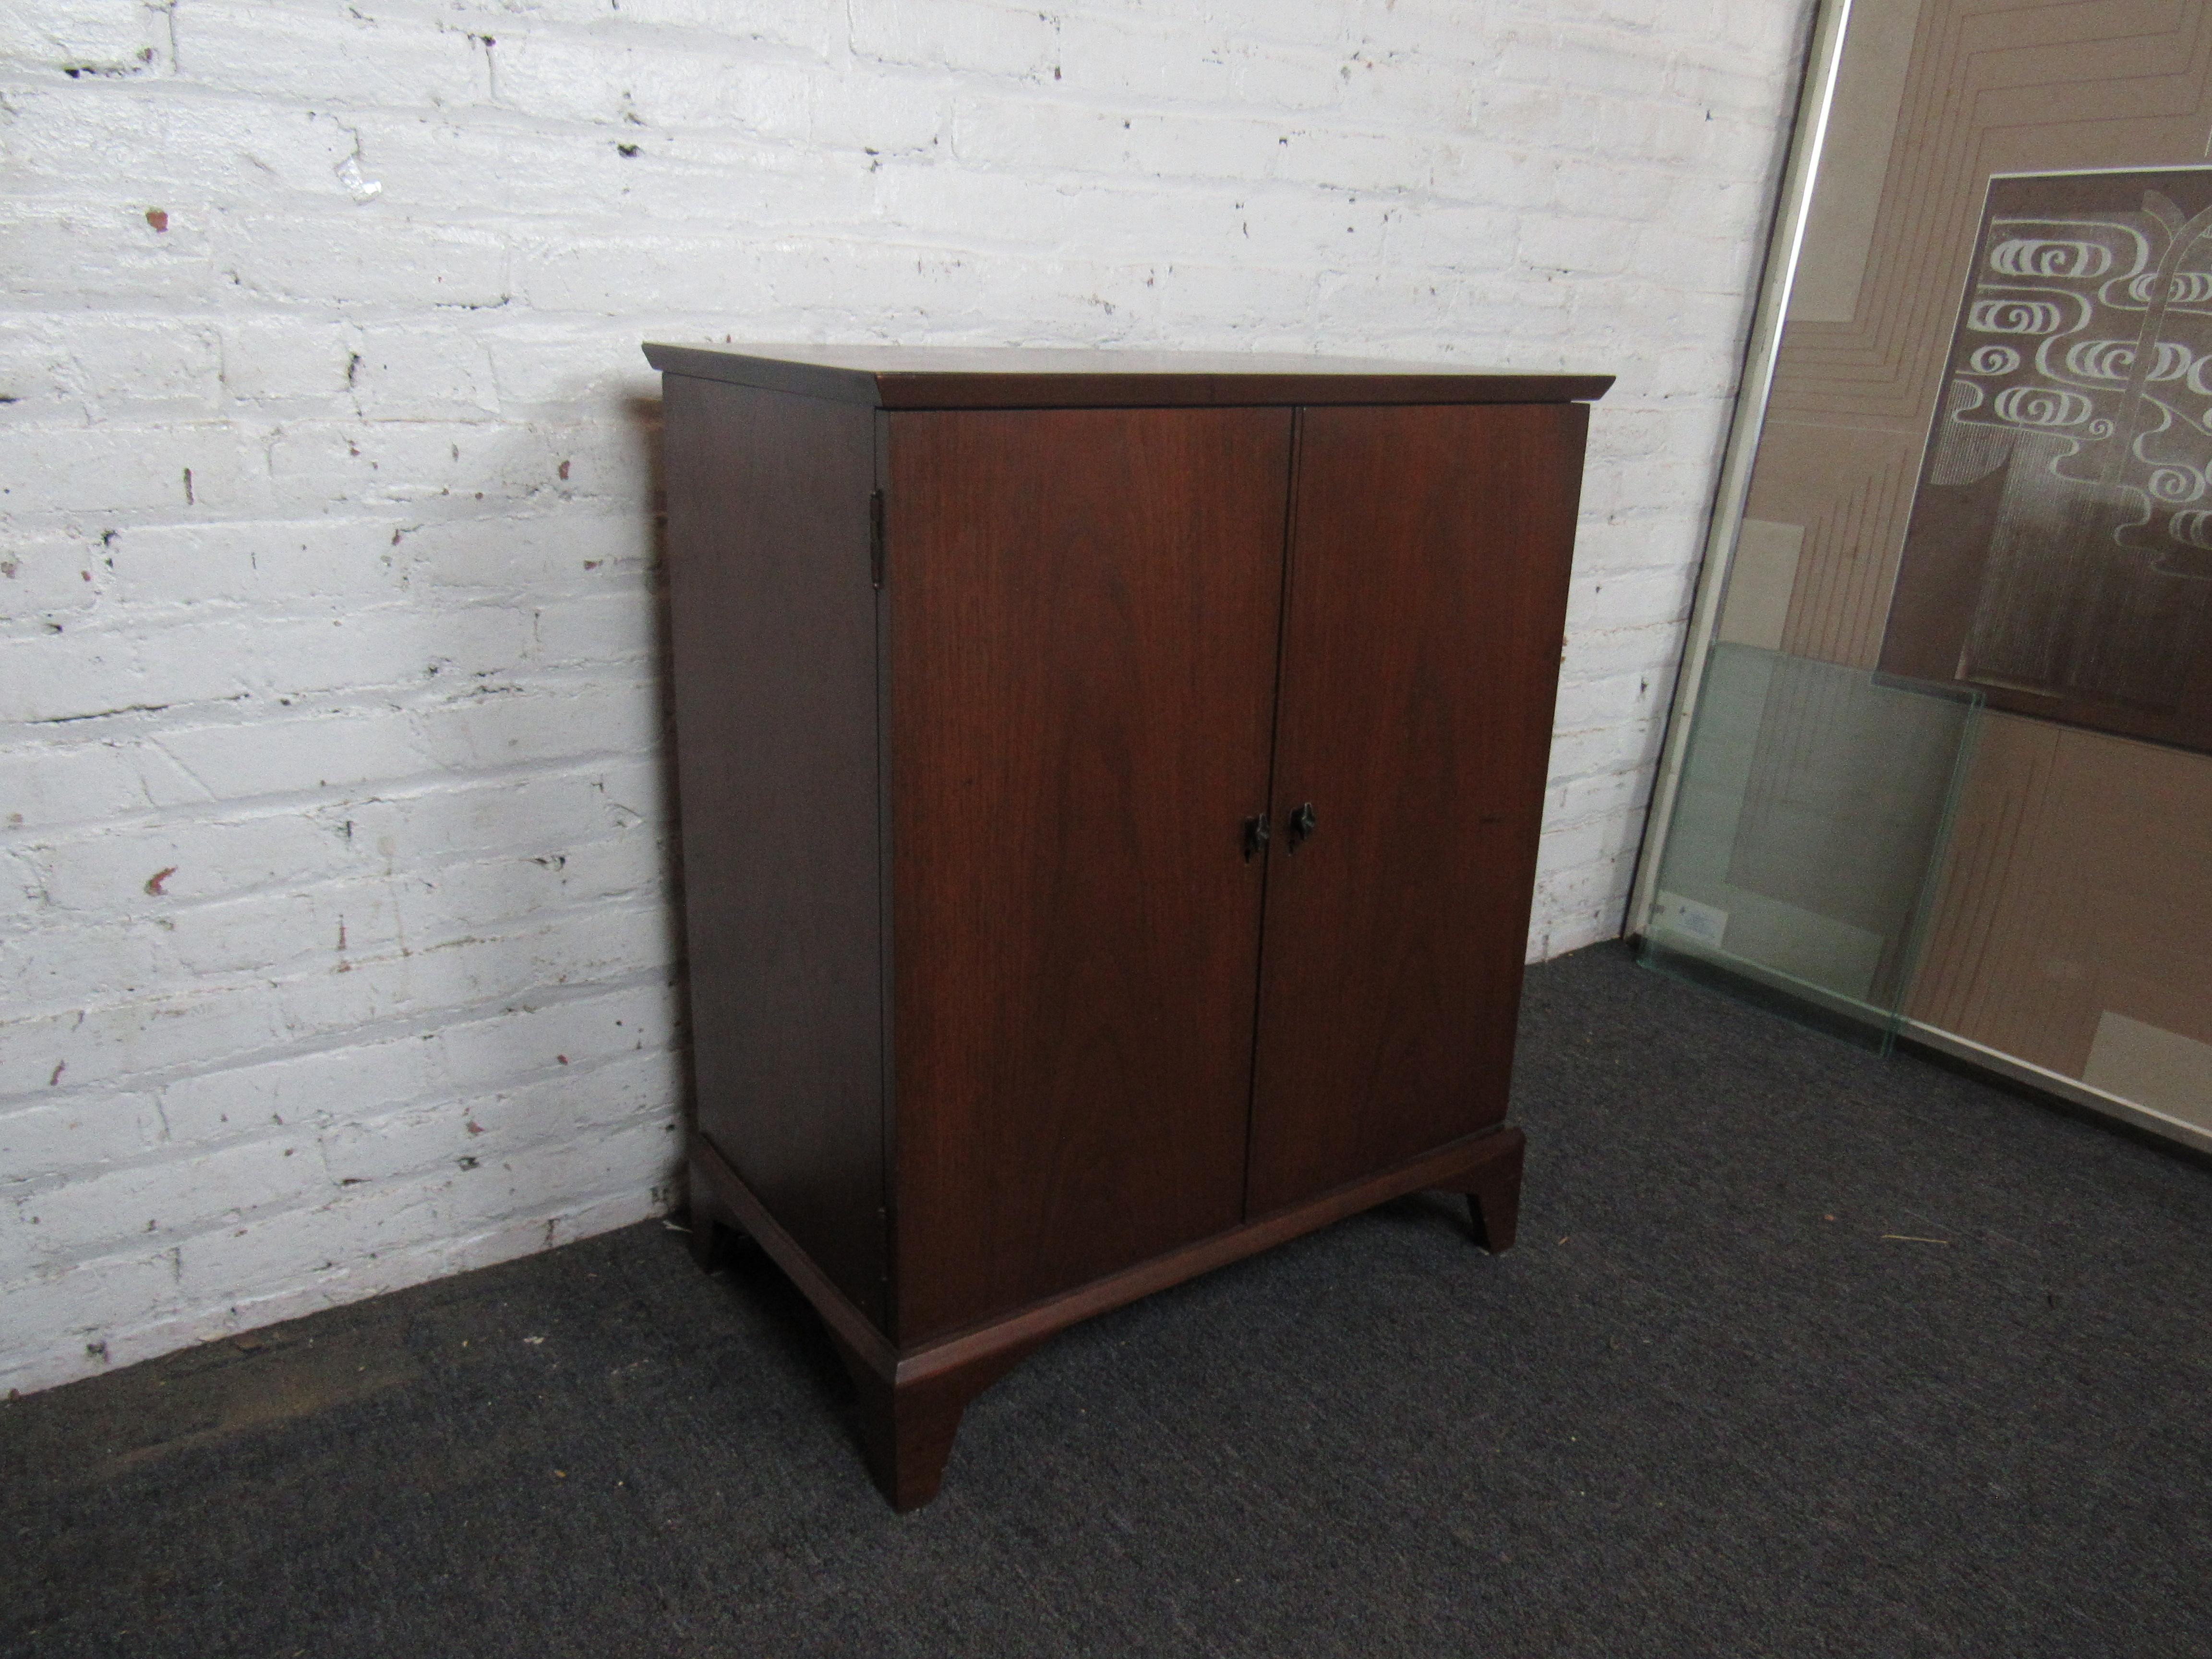 This vintage cabinet offers plenty of storage in a compact design made complete by a handsome walnut exterior. The cabinet's top also opens to reveal a stone surface. Please confirm item location with seller (NY/NJ).